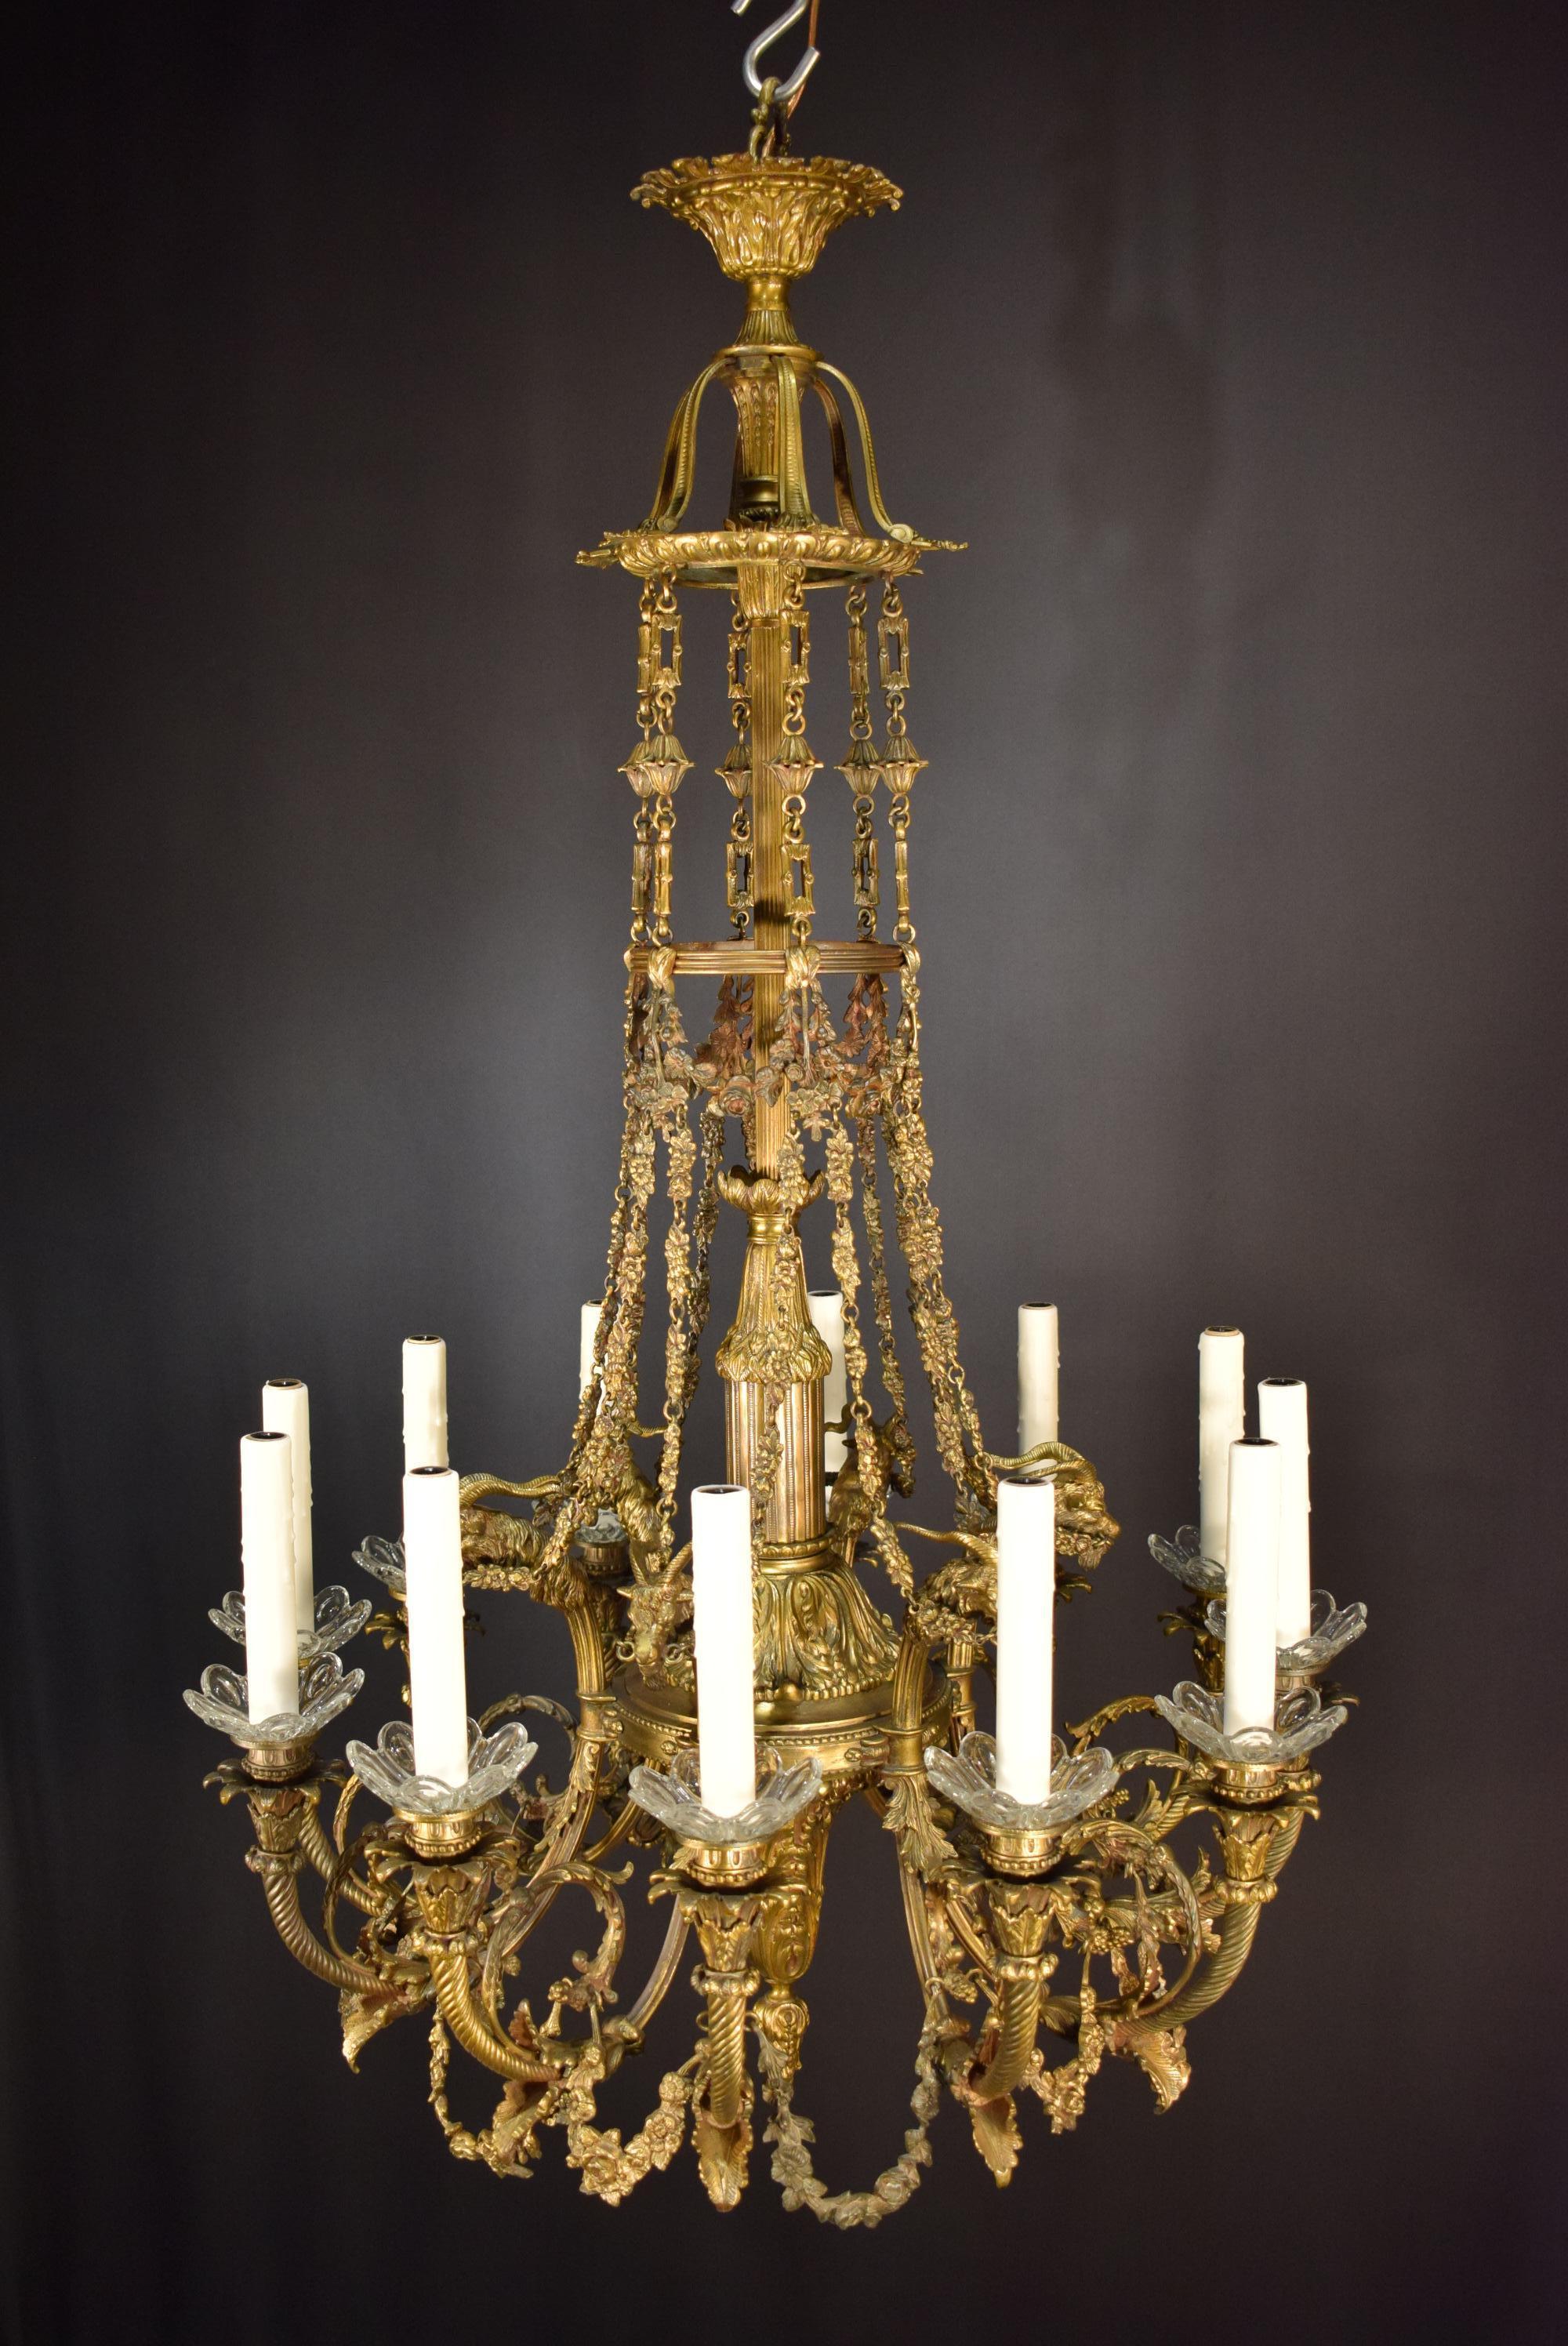 A very fine gilt bronze chandelier depicting ram's heads stylized flower garlands, exquisite decorative chains. Crystal bobeches.
France, circa 1900. 12 lights.
Dimensions: Height 43 1/2